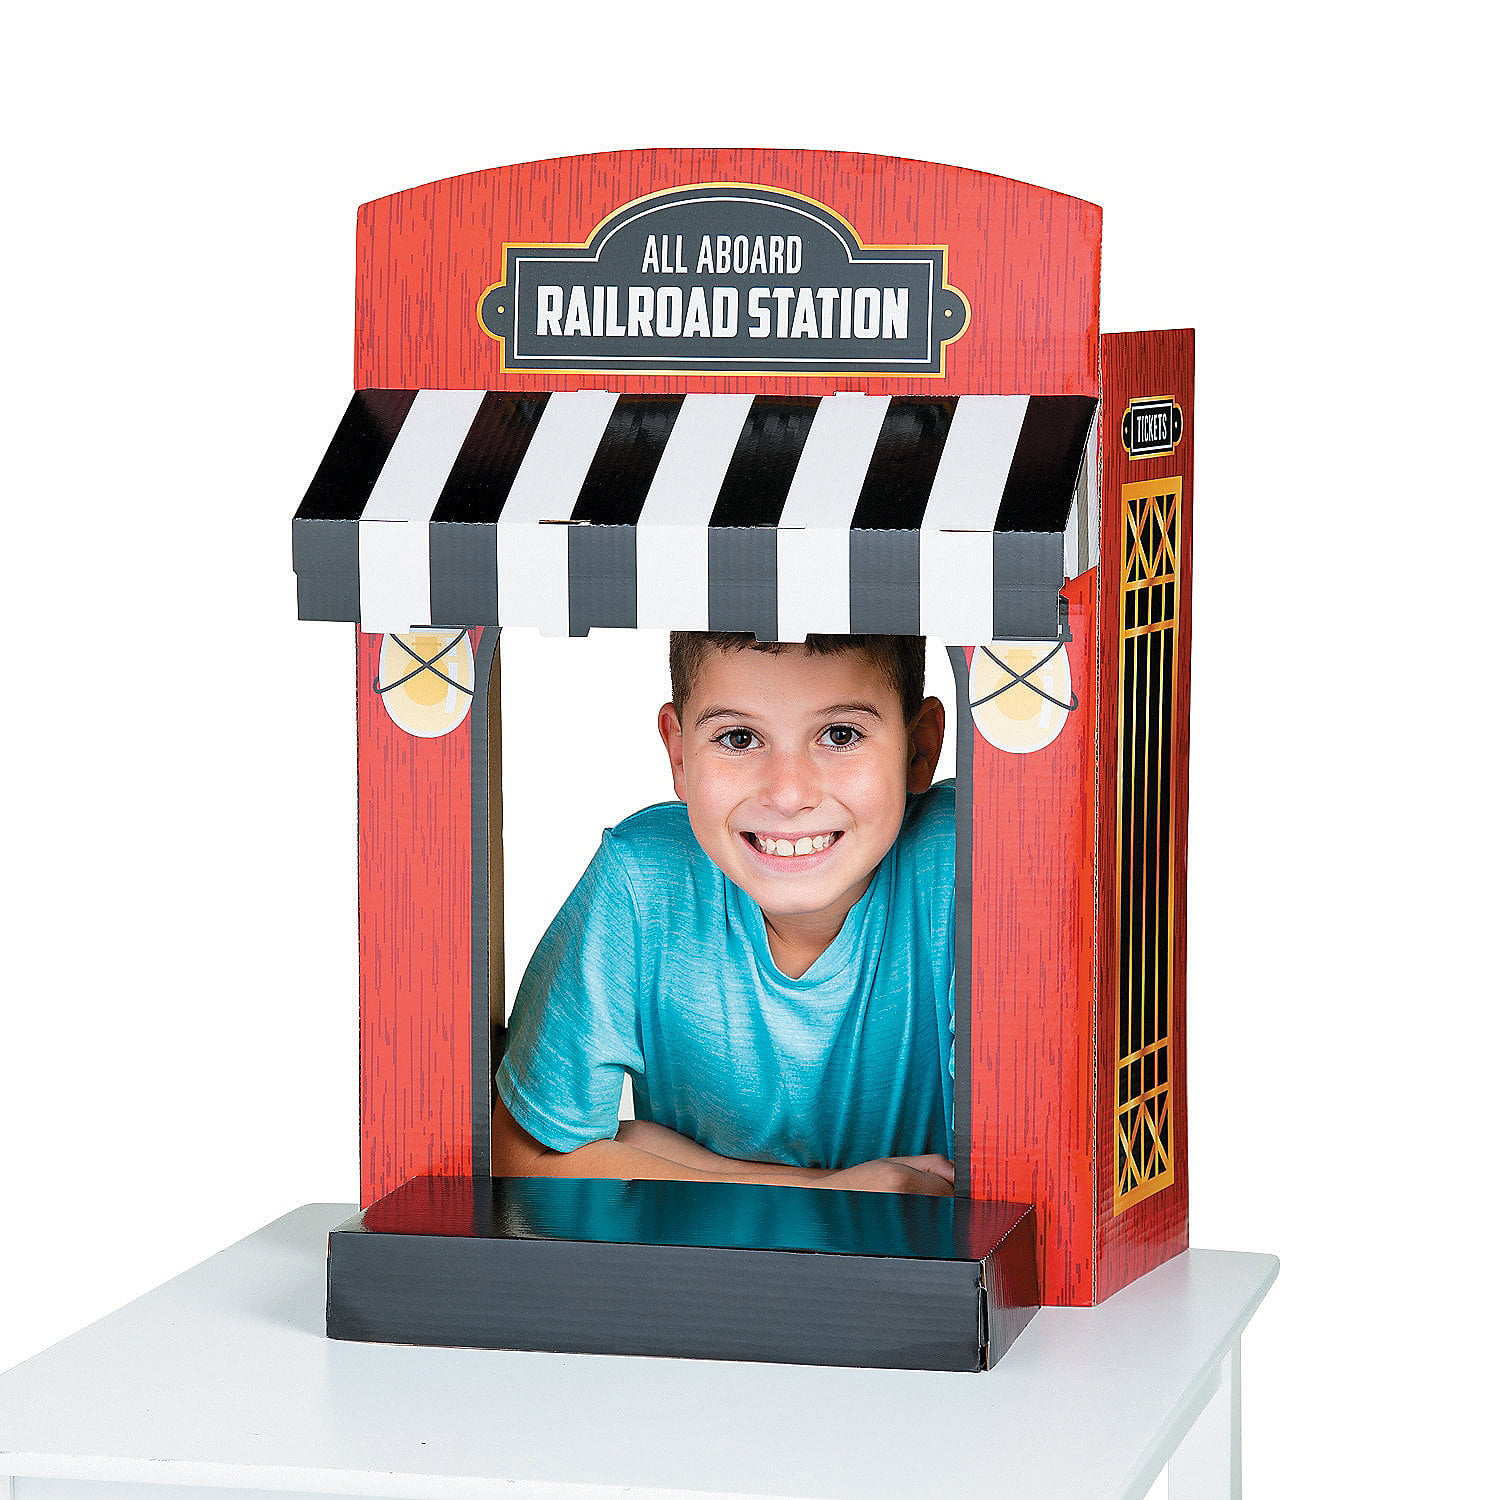 Railroad Vbs Ticket Booth Tabletop Photo Op Stand Up Party Decor 2